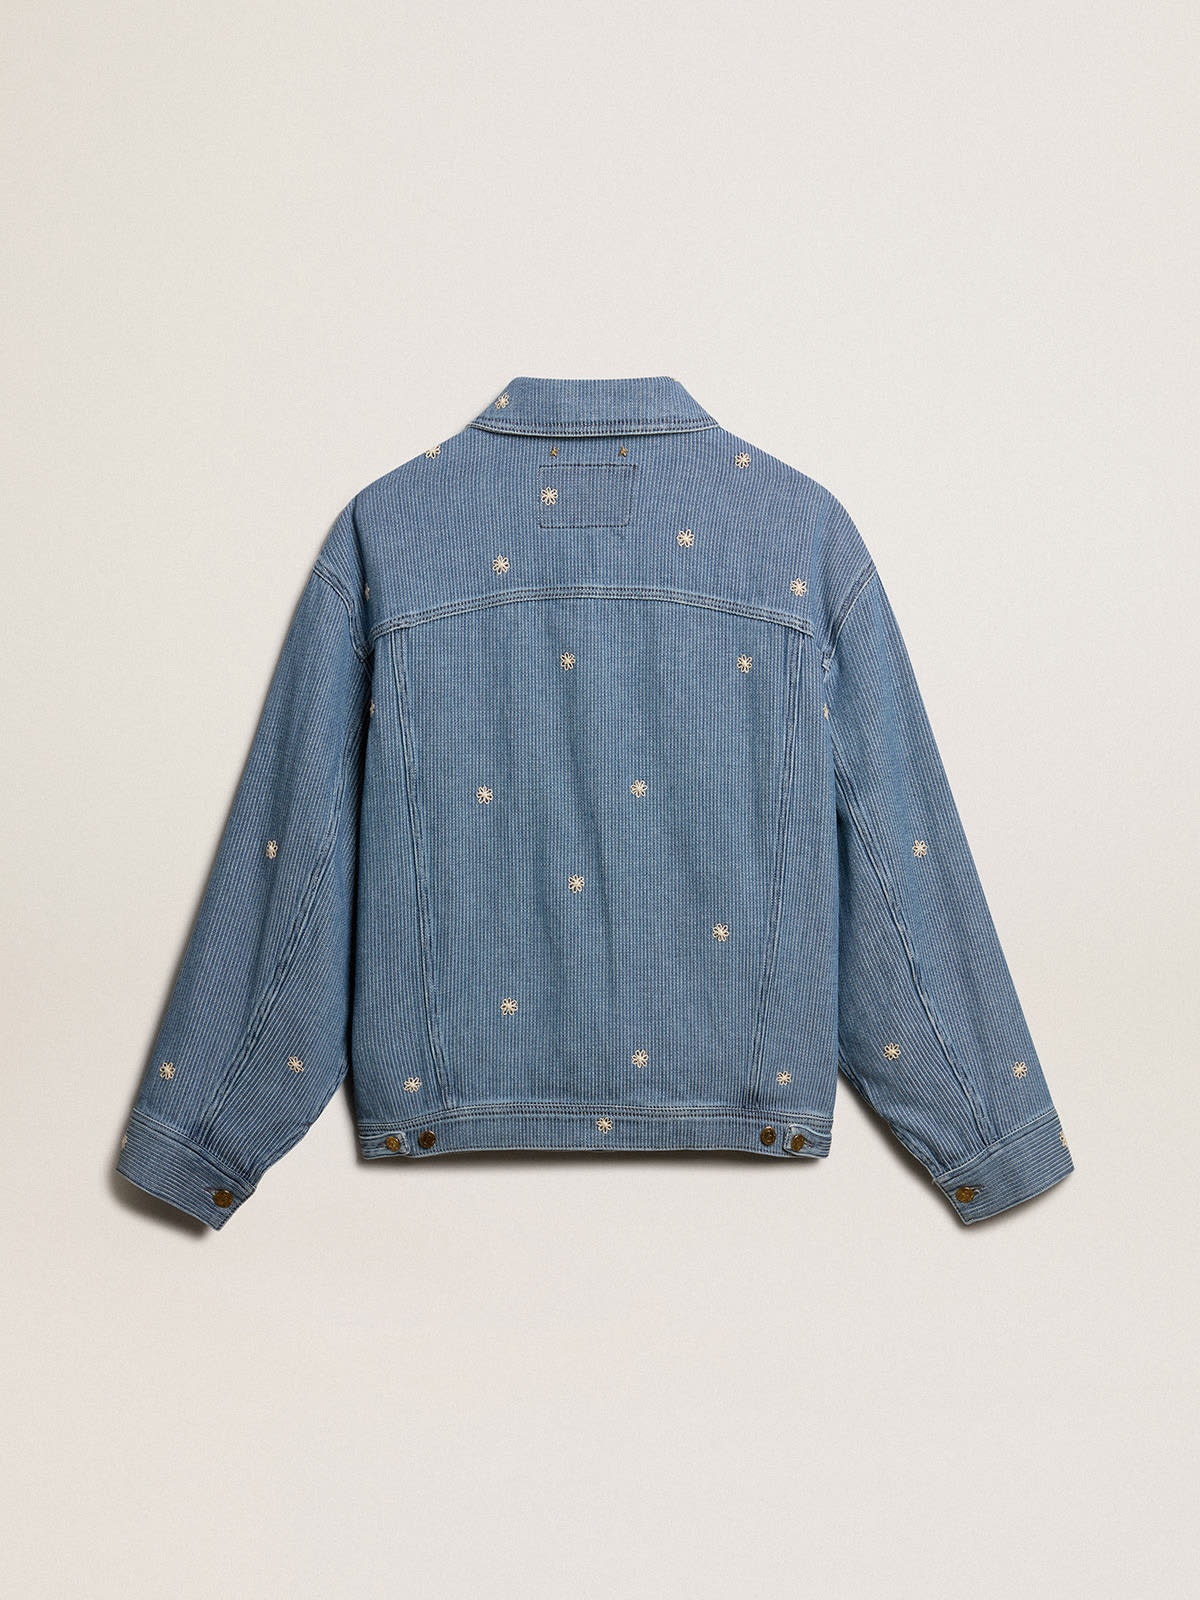 Women's denim jacket with floral embroidery - 5